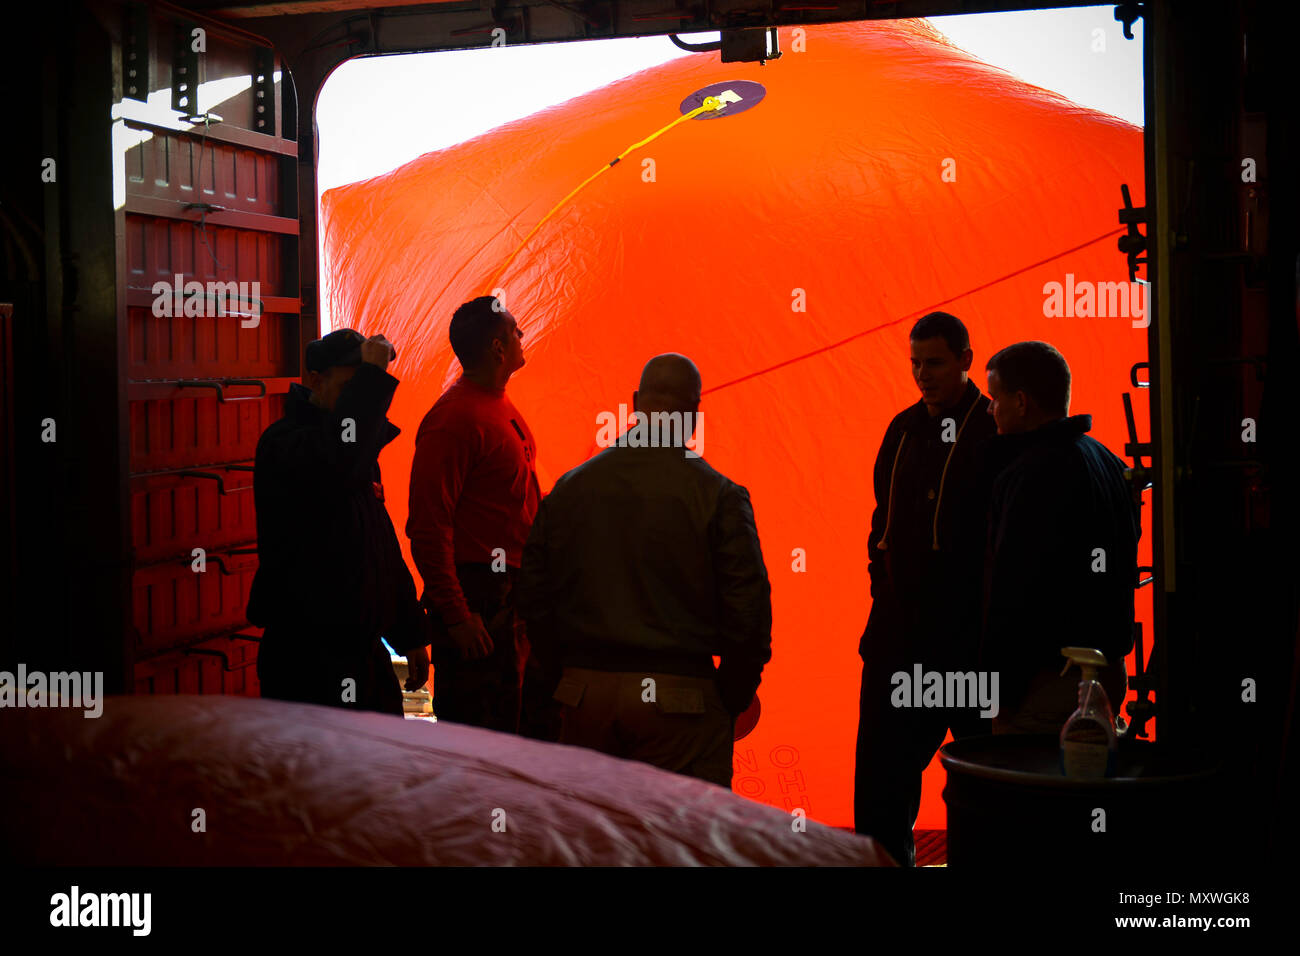 ATLANTIC OCEAN (Dec. 10, 2016) – Sailors prepare to push a “killer tomato” over the side of amphibious assault ship USS Iwo Jima (LHD 7) for a life fire training exercise. Iwo Jima is underway pursuing mobility-engineering (MOB-E) and mobility-seaman (MOB-S) certifications as part of the ship’s pre-deployment qualification process. (U.S. Navy photo by Petty Officer 3rd Class Jess E. Toner/Released) Stock Photo